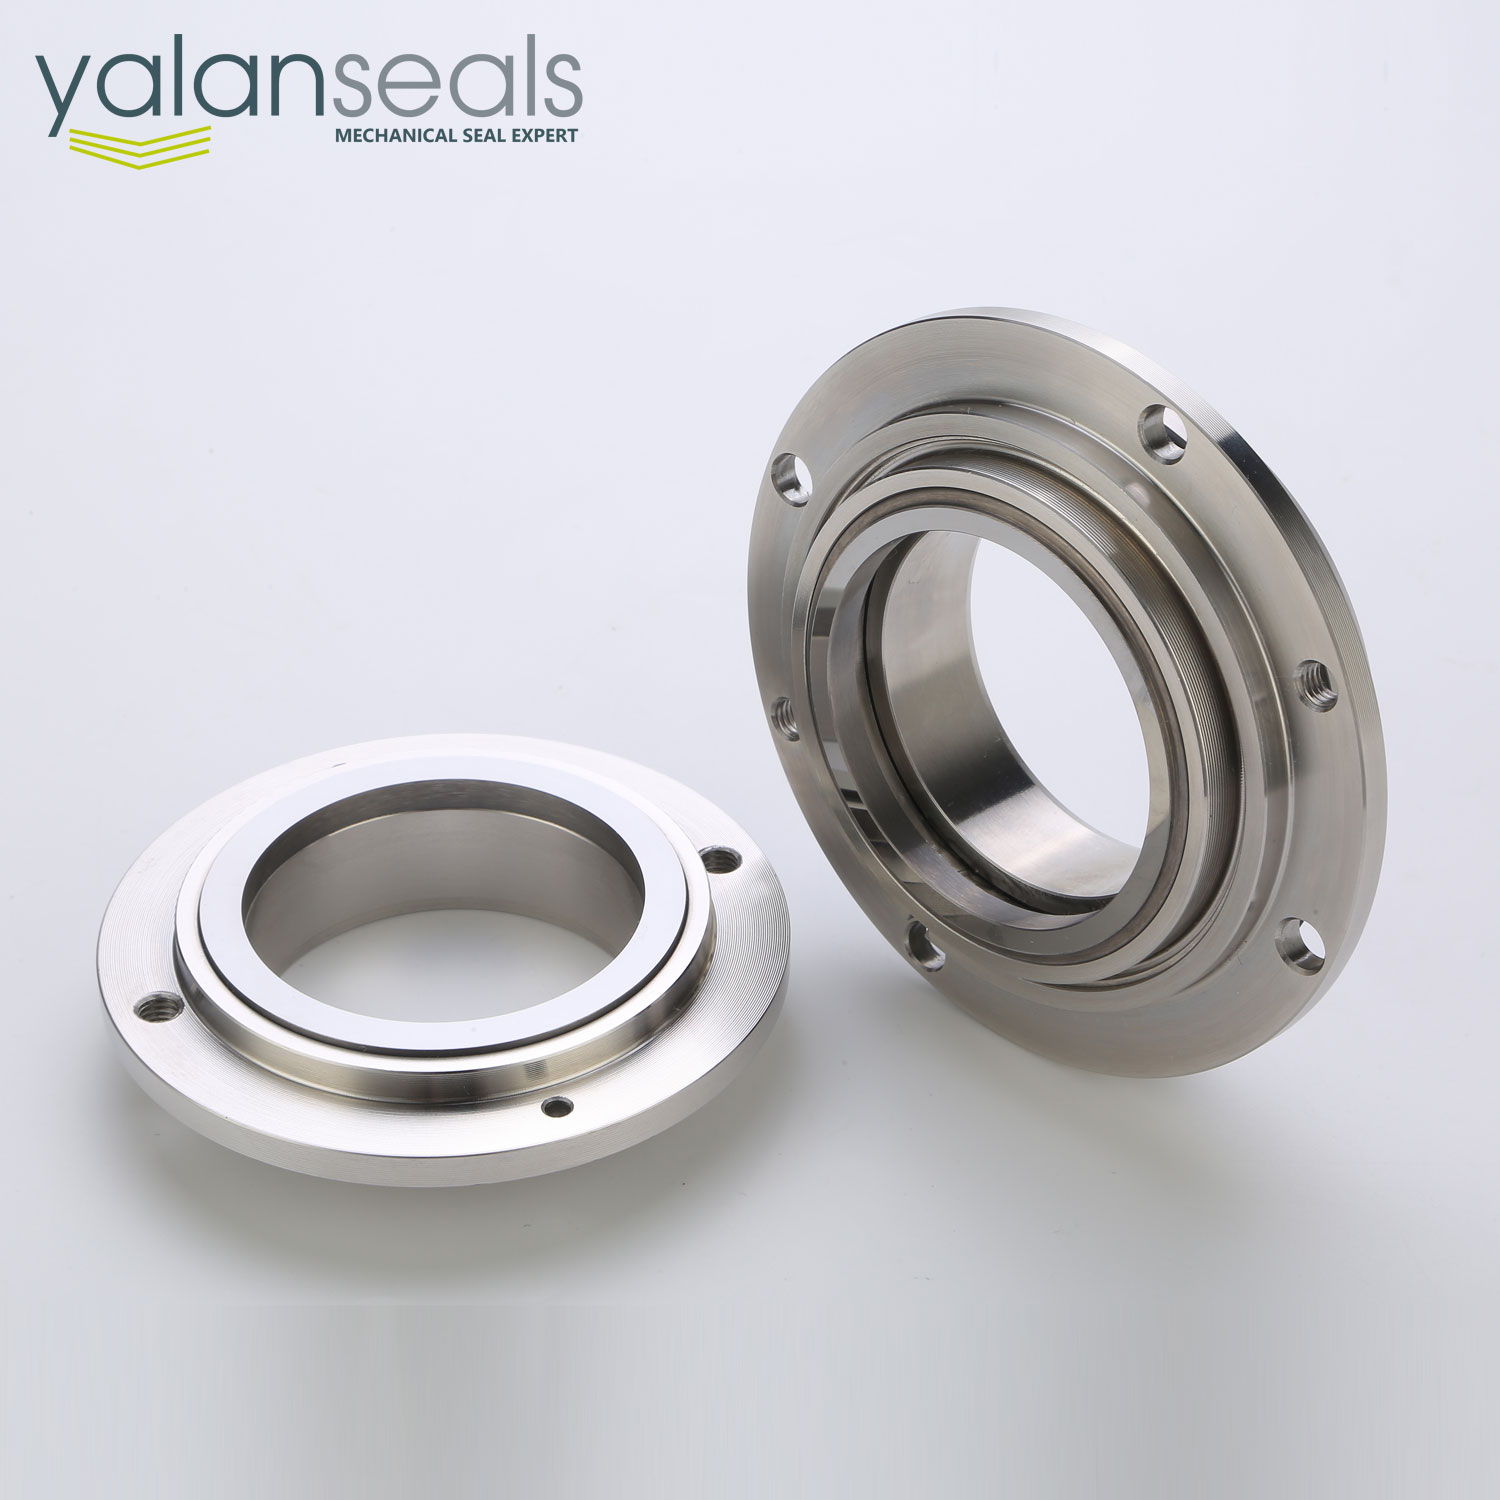 YALAN 10J-10D High Speed Mechanical Seals for Blowers, High Speed Pumps and Compressors